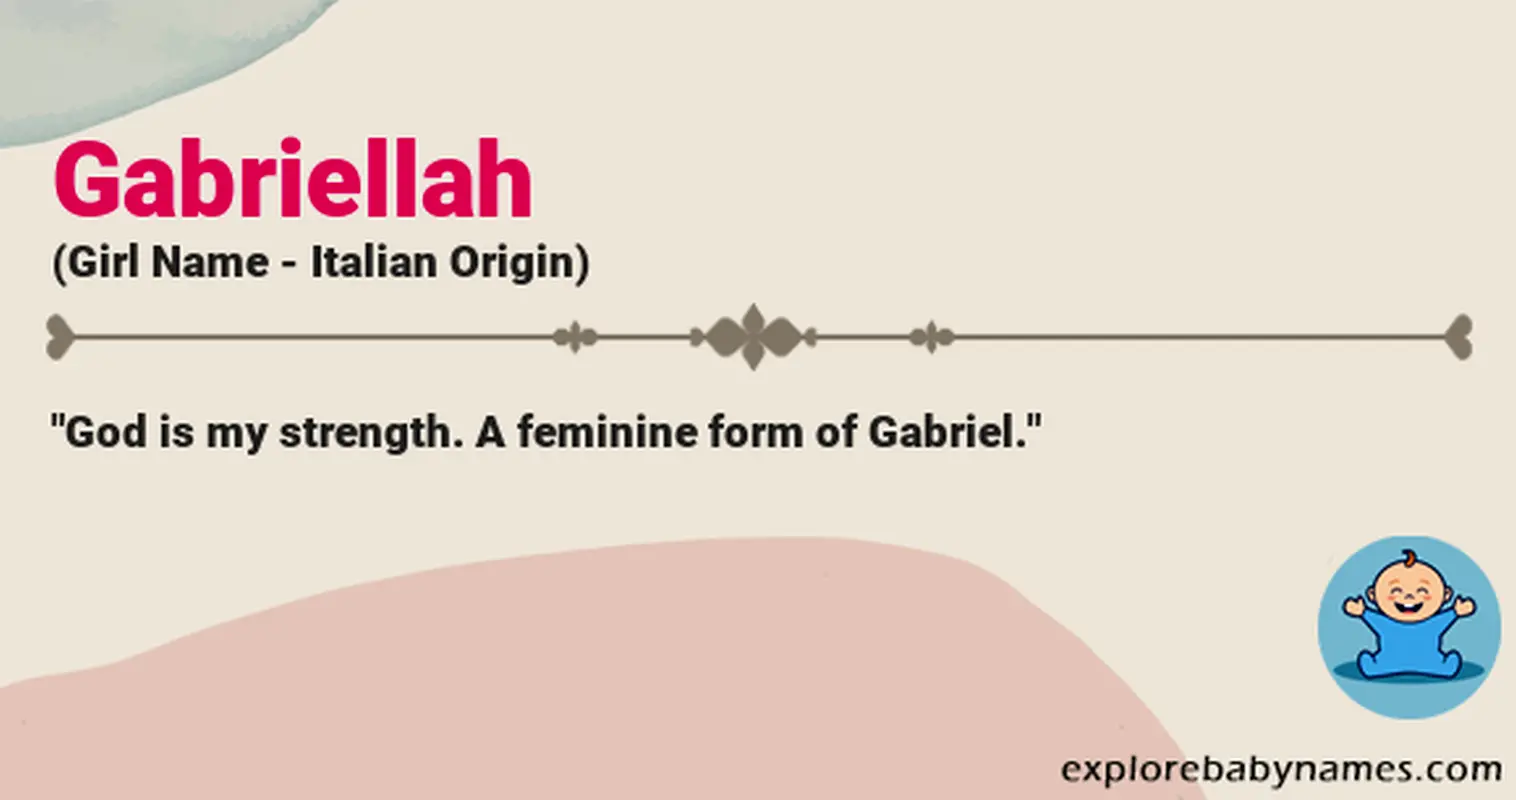 Meaning of Gabriellah